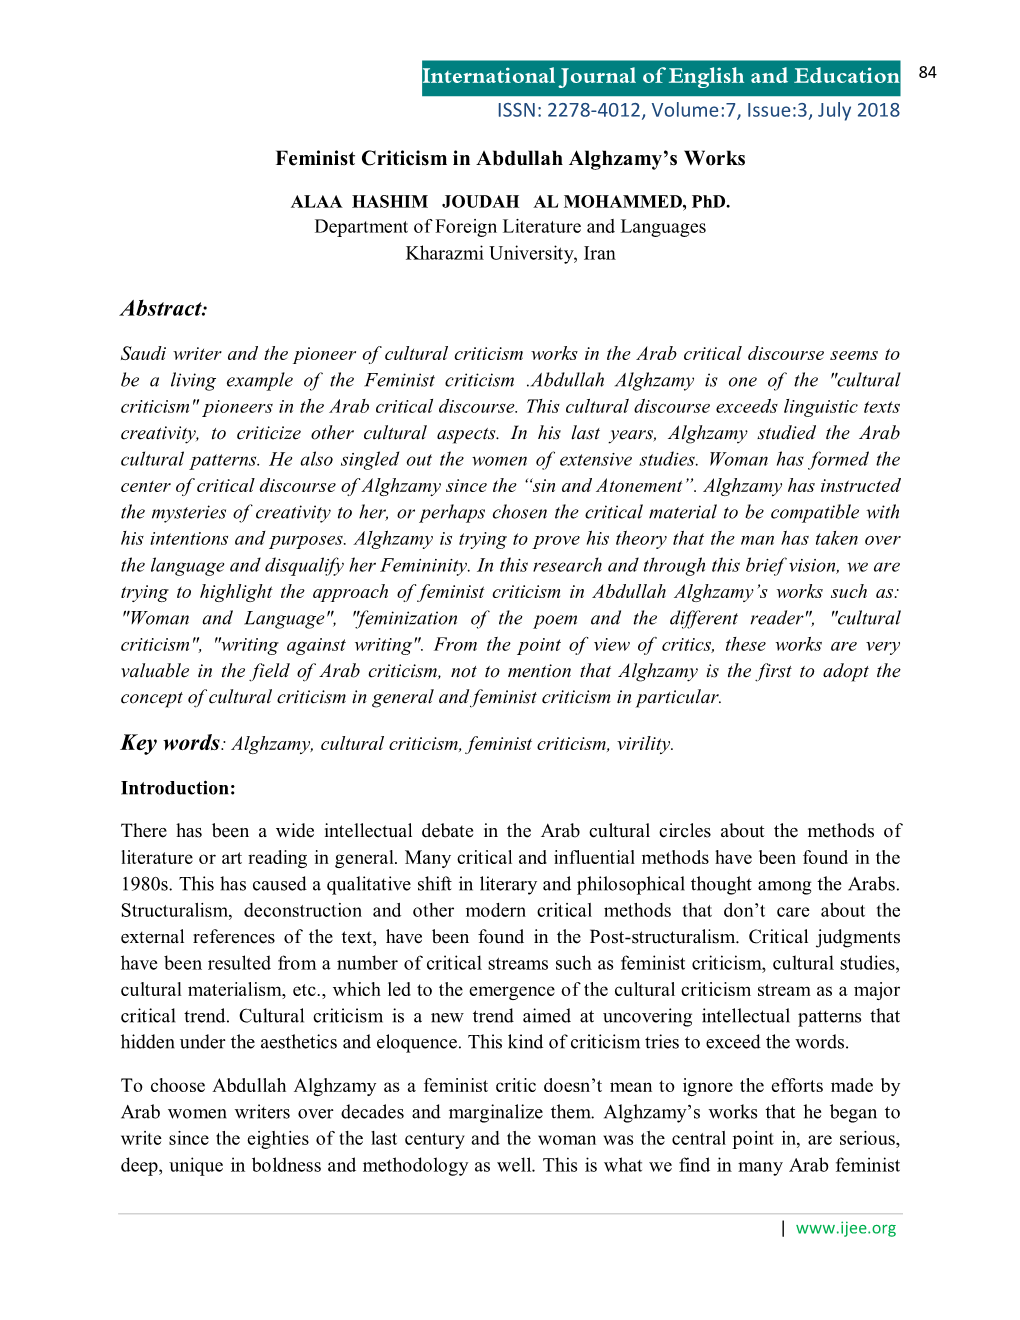 International Journal of English and Education Abstract